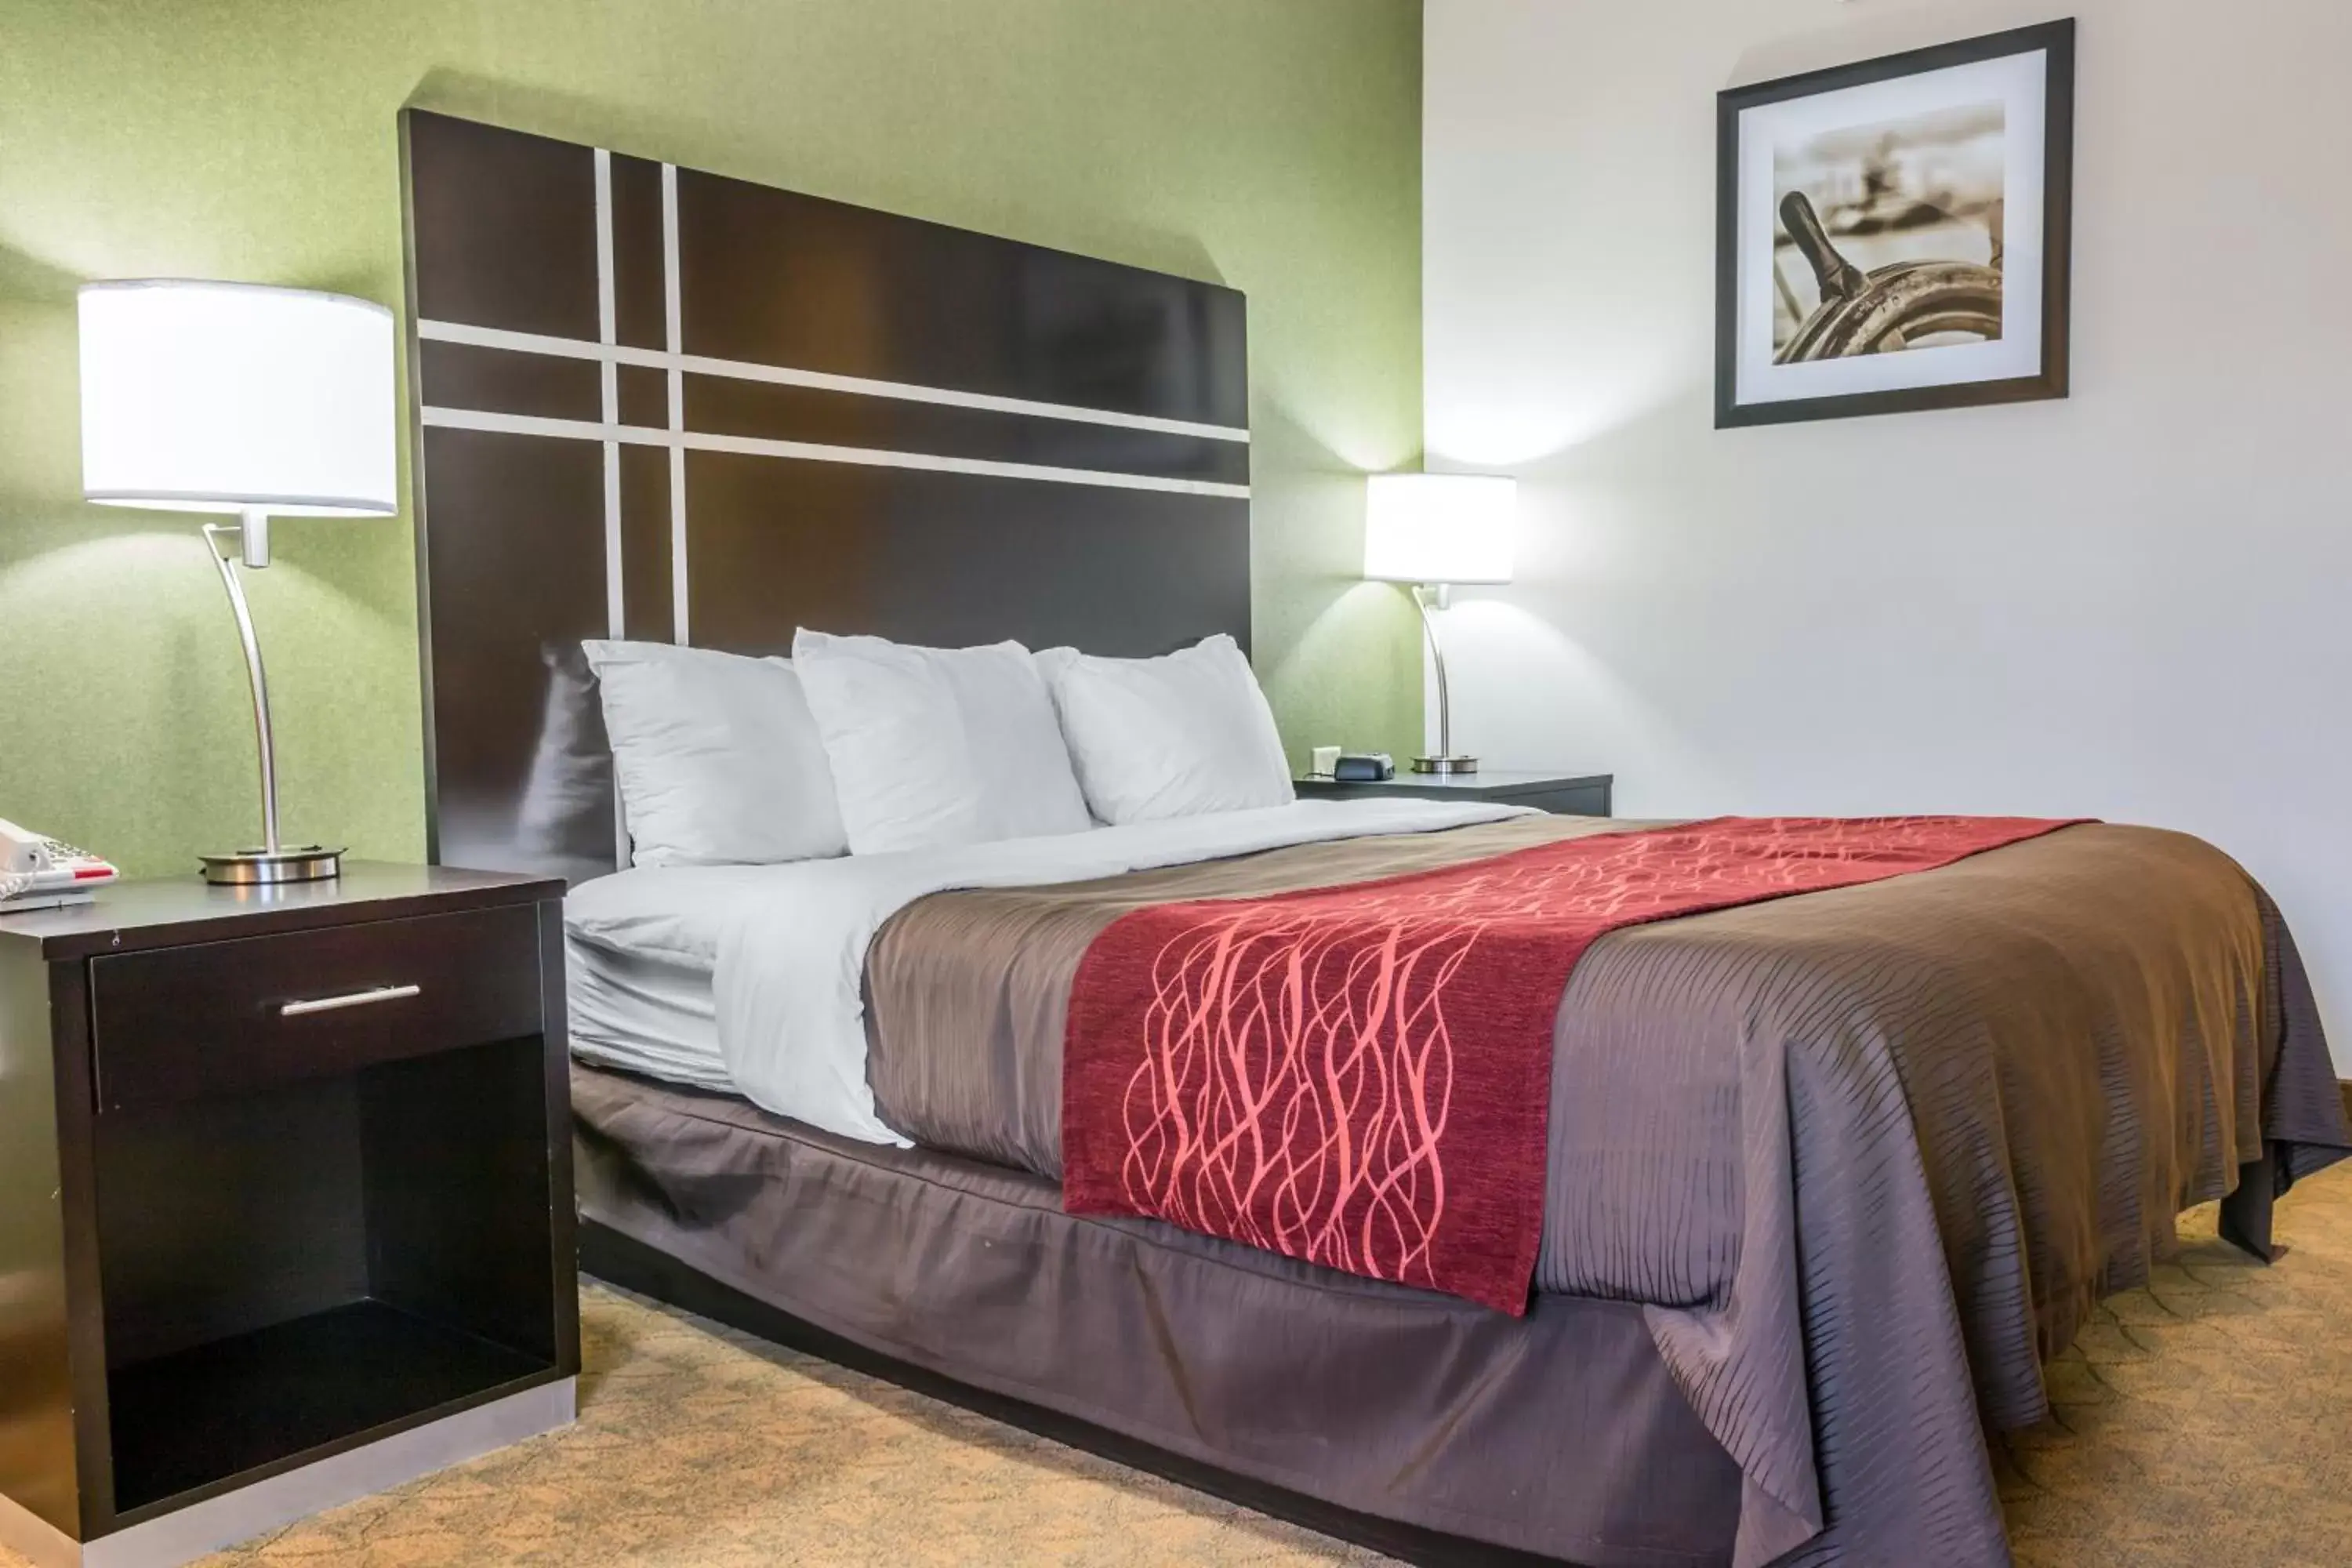 King Room - Non-Smoking in Comfort Inn & Suites Maumee - Toledo - I80-90